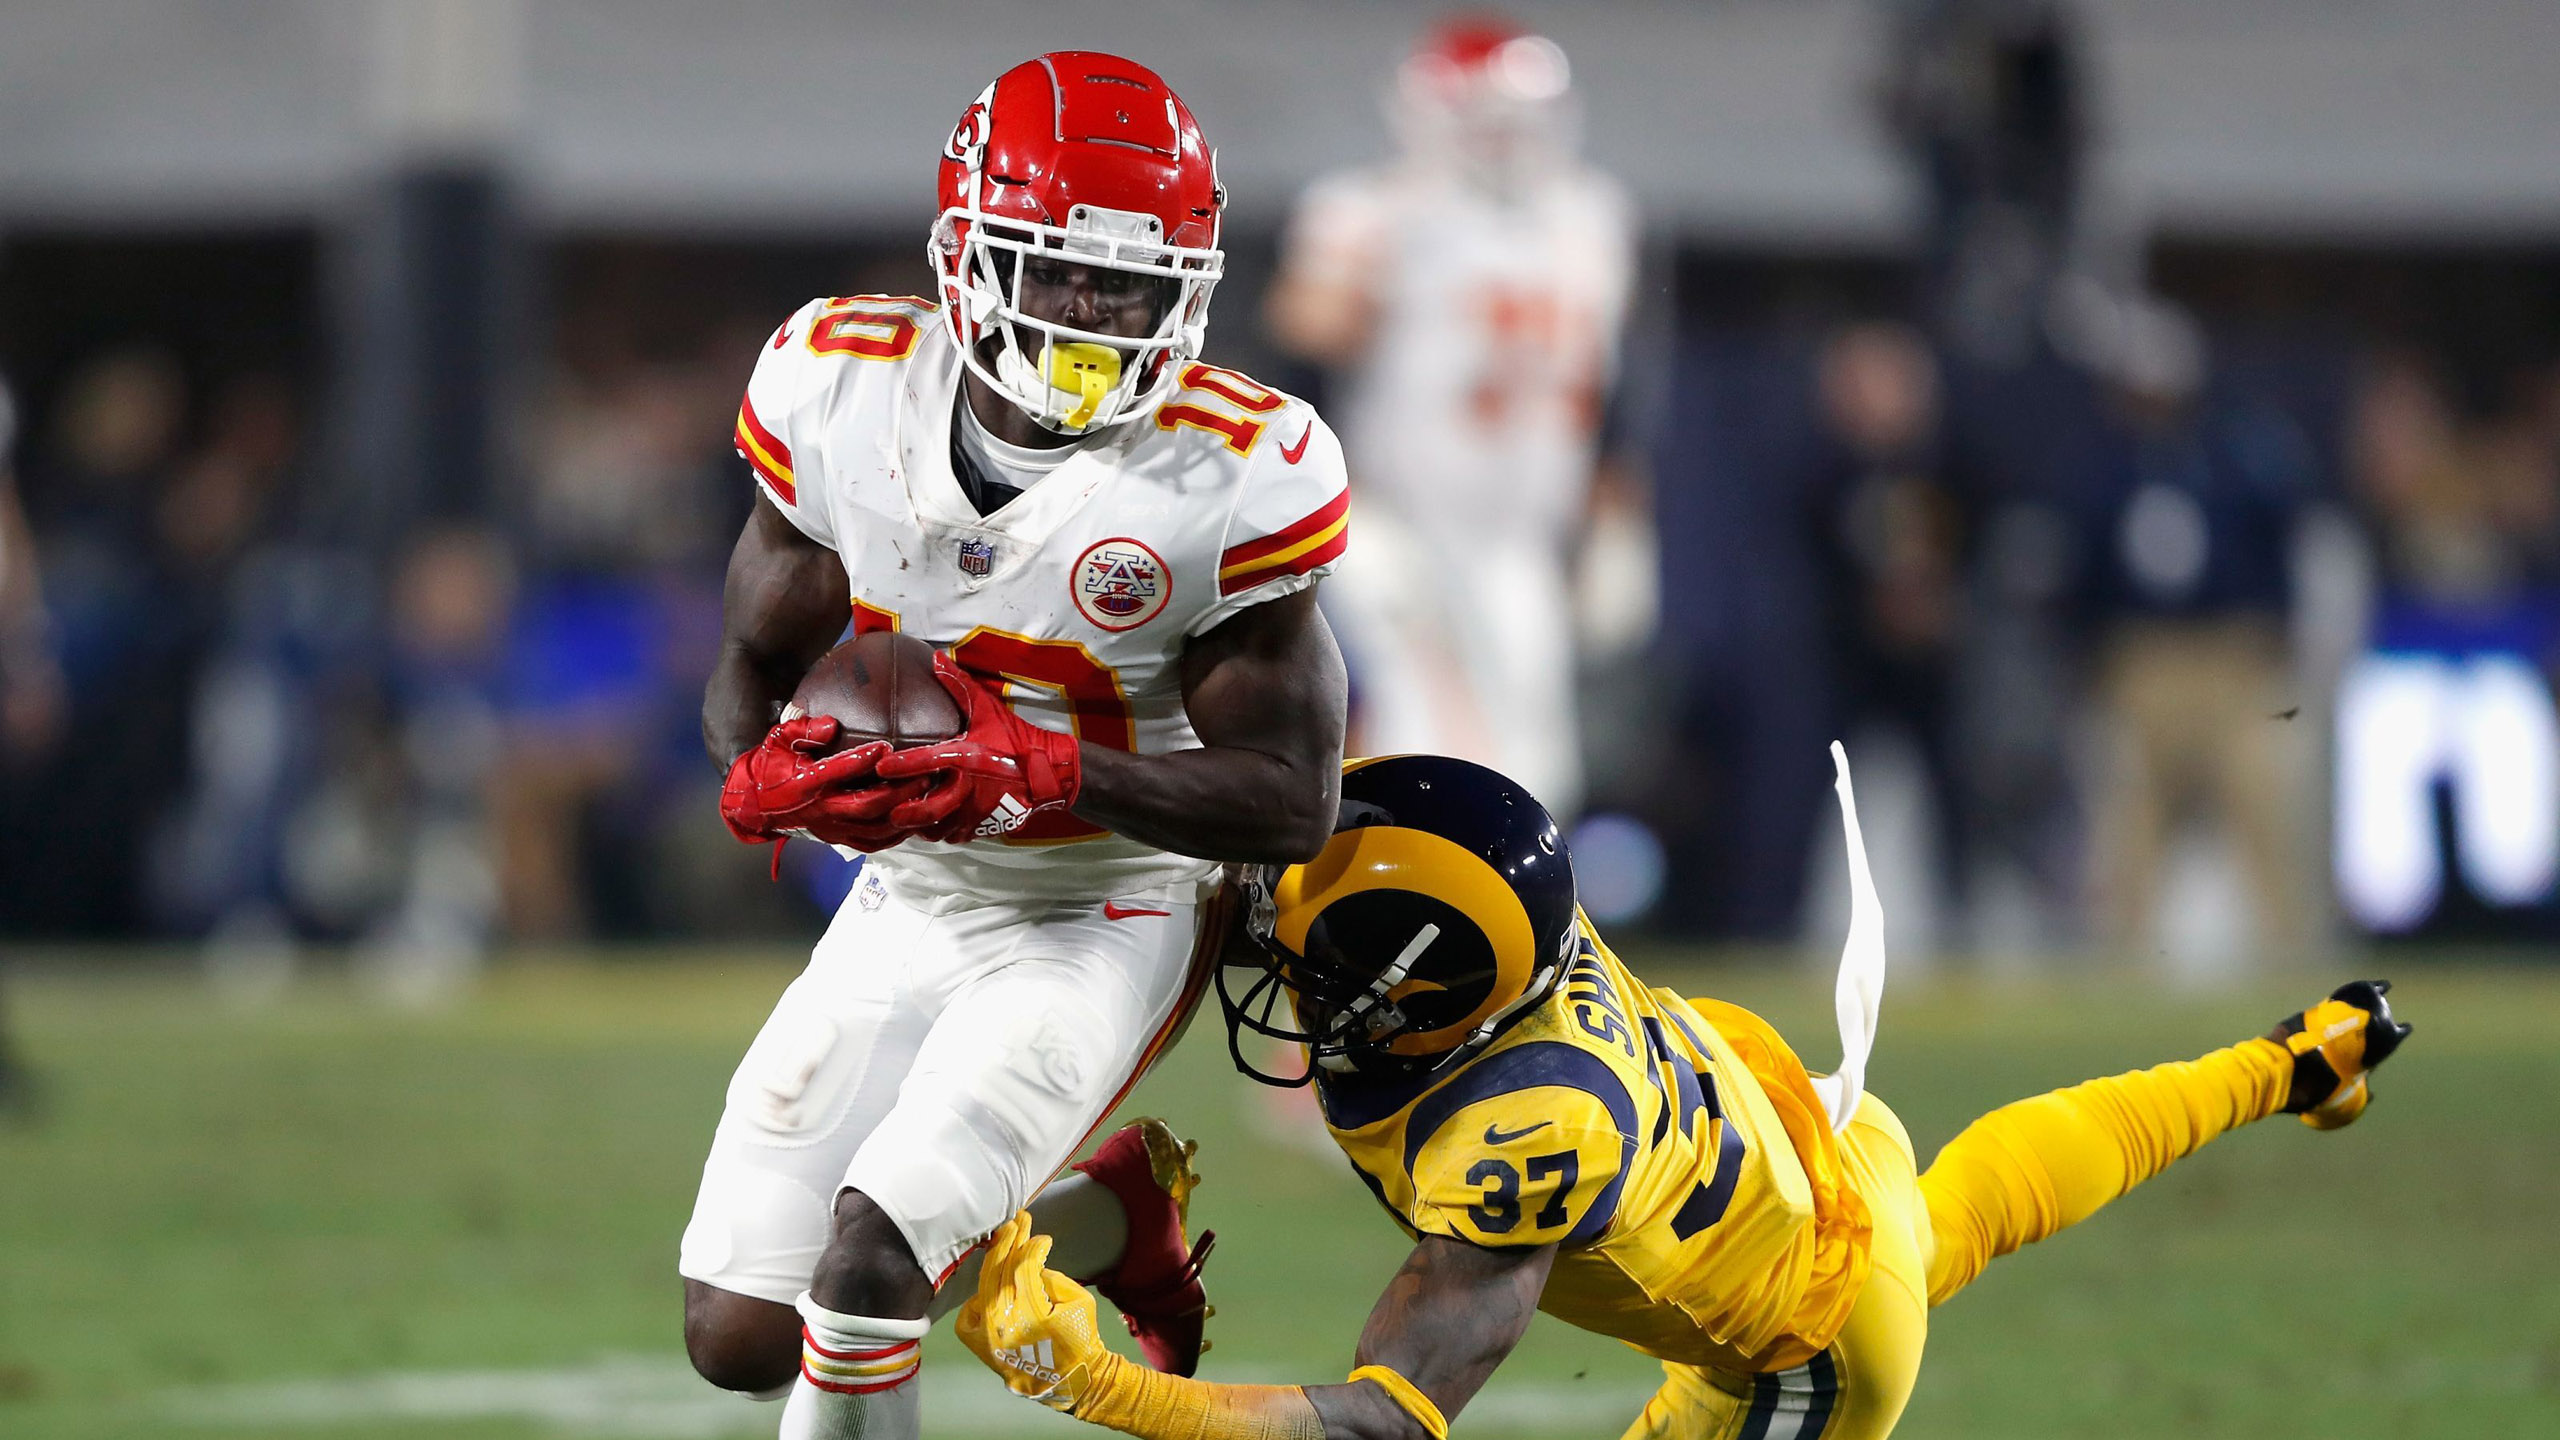 Another Player Is Trying to Catch Tyreek Hill In Blur Players Wallpaper HD Tyreek Hill